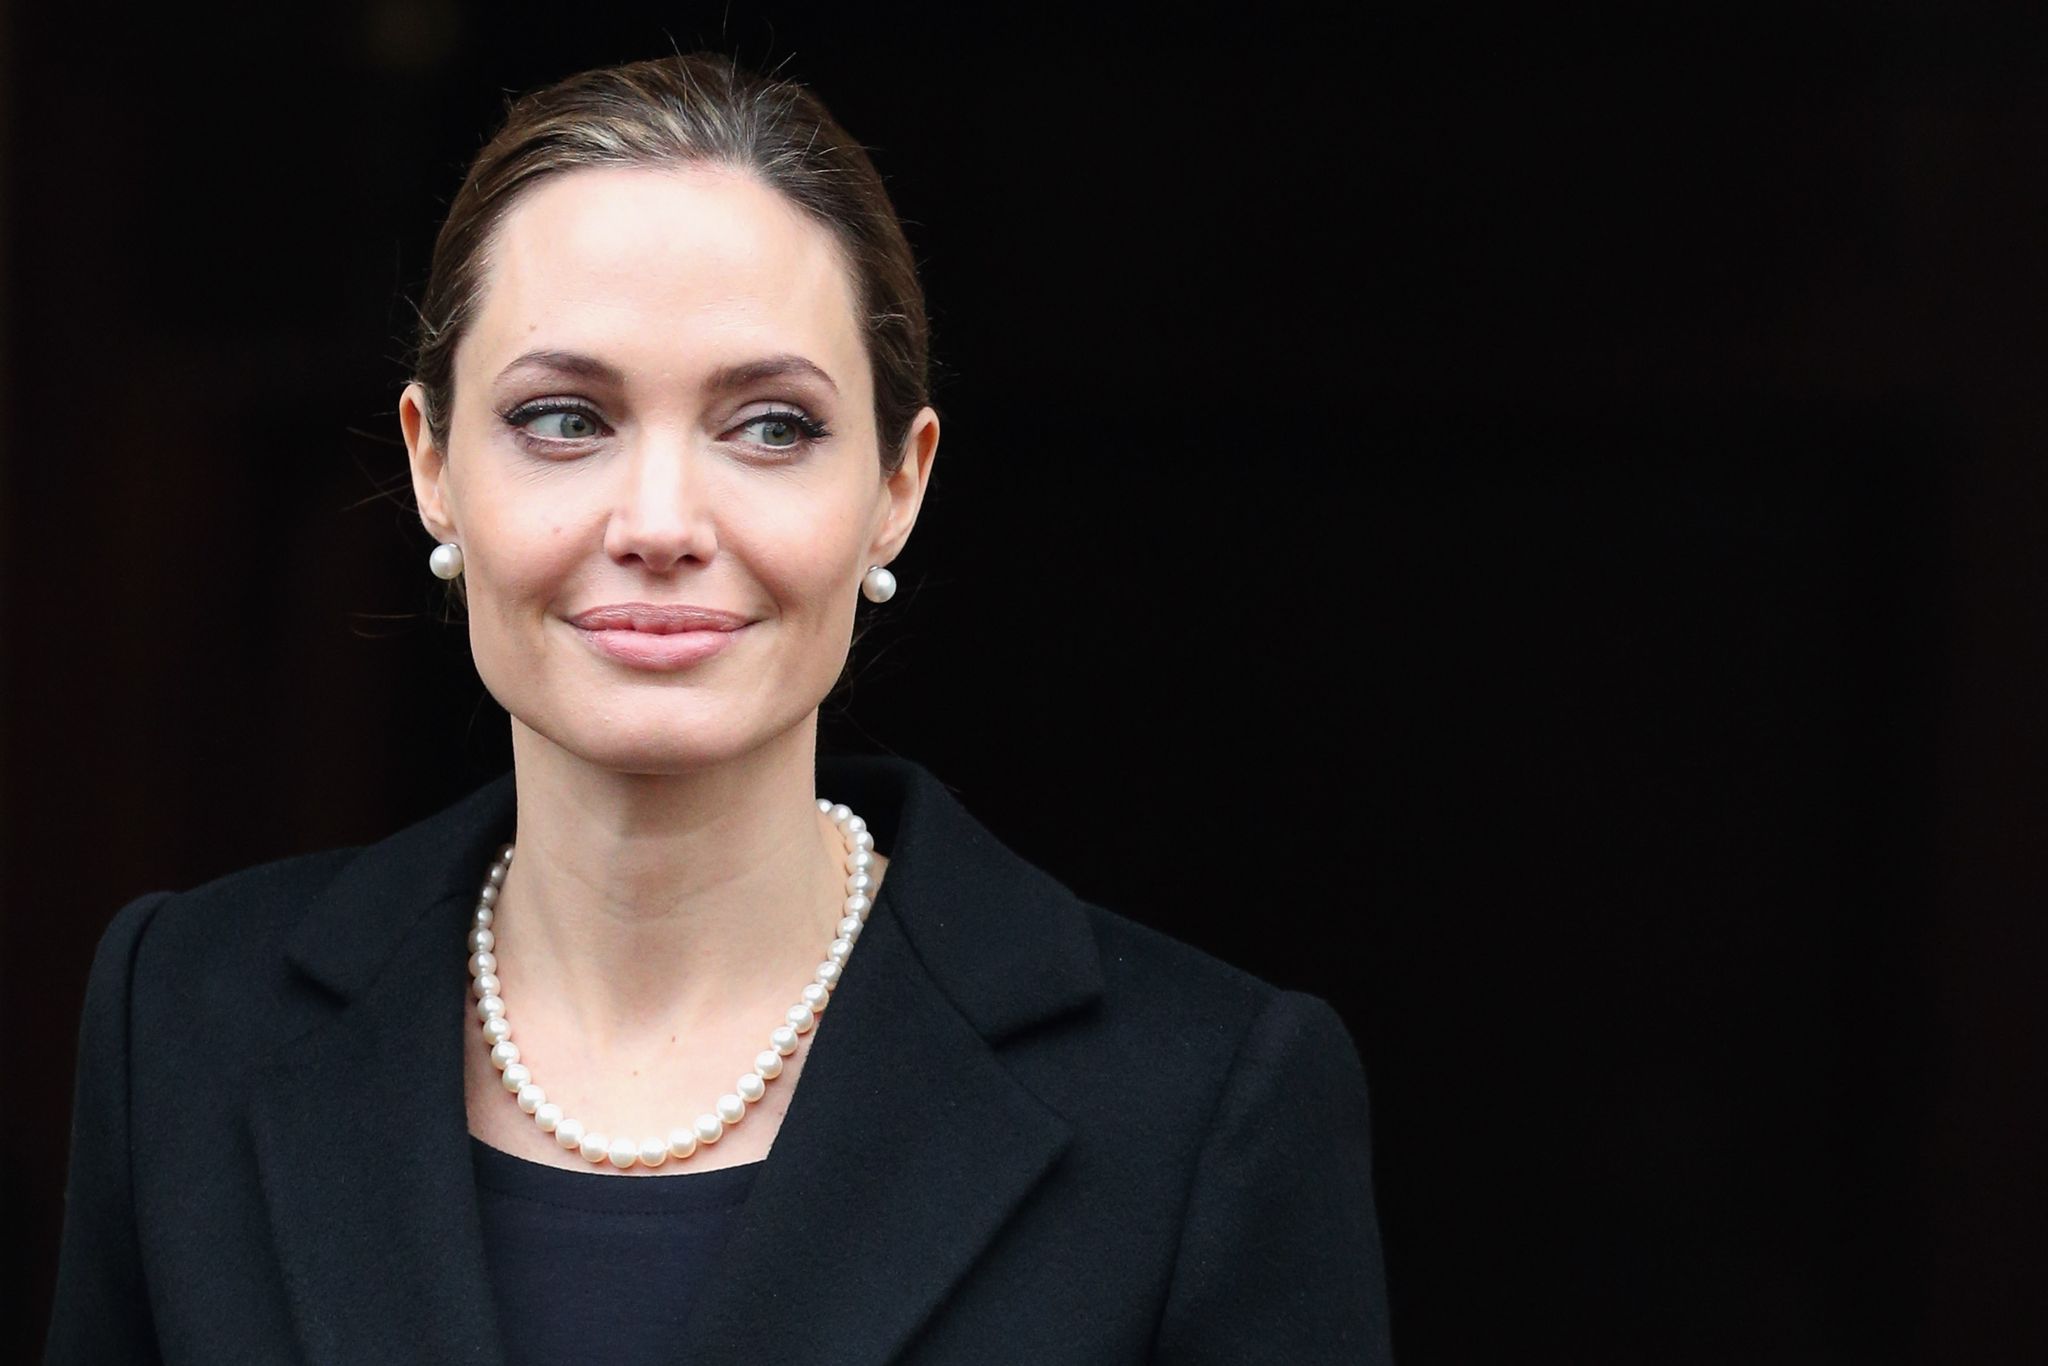 Angelina Jolie doesn't rule out future move to politics